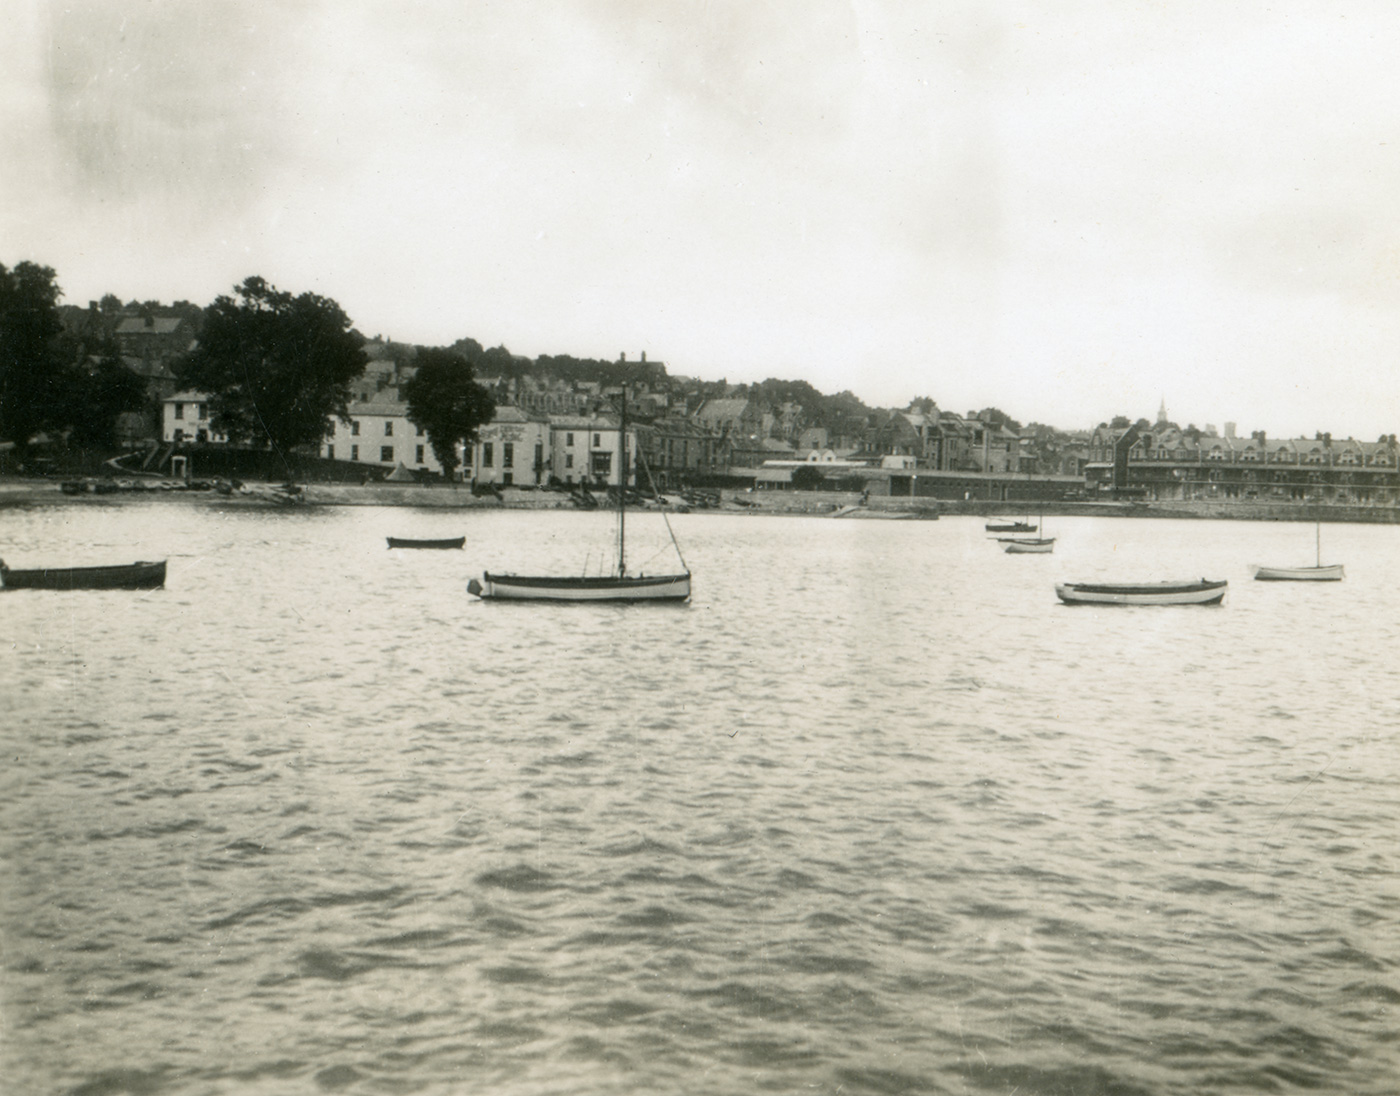 Boats in Swanage Bay